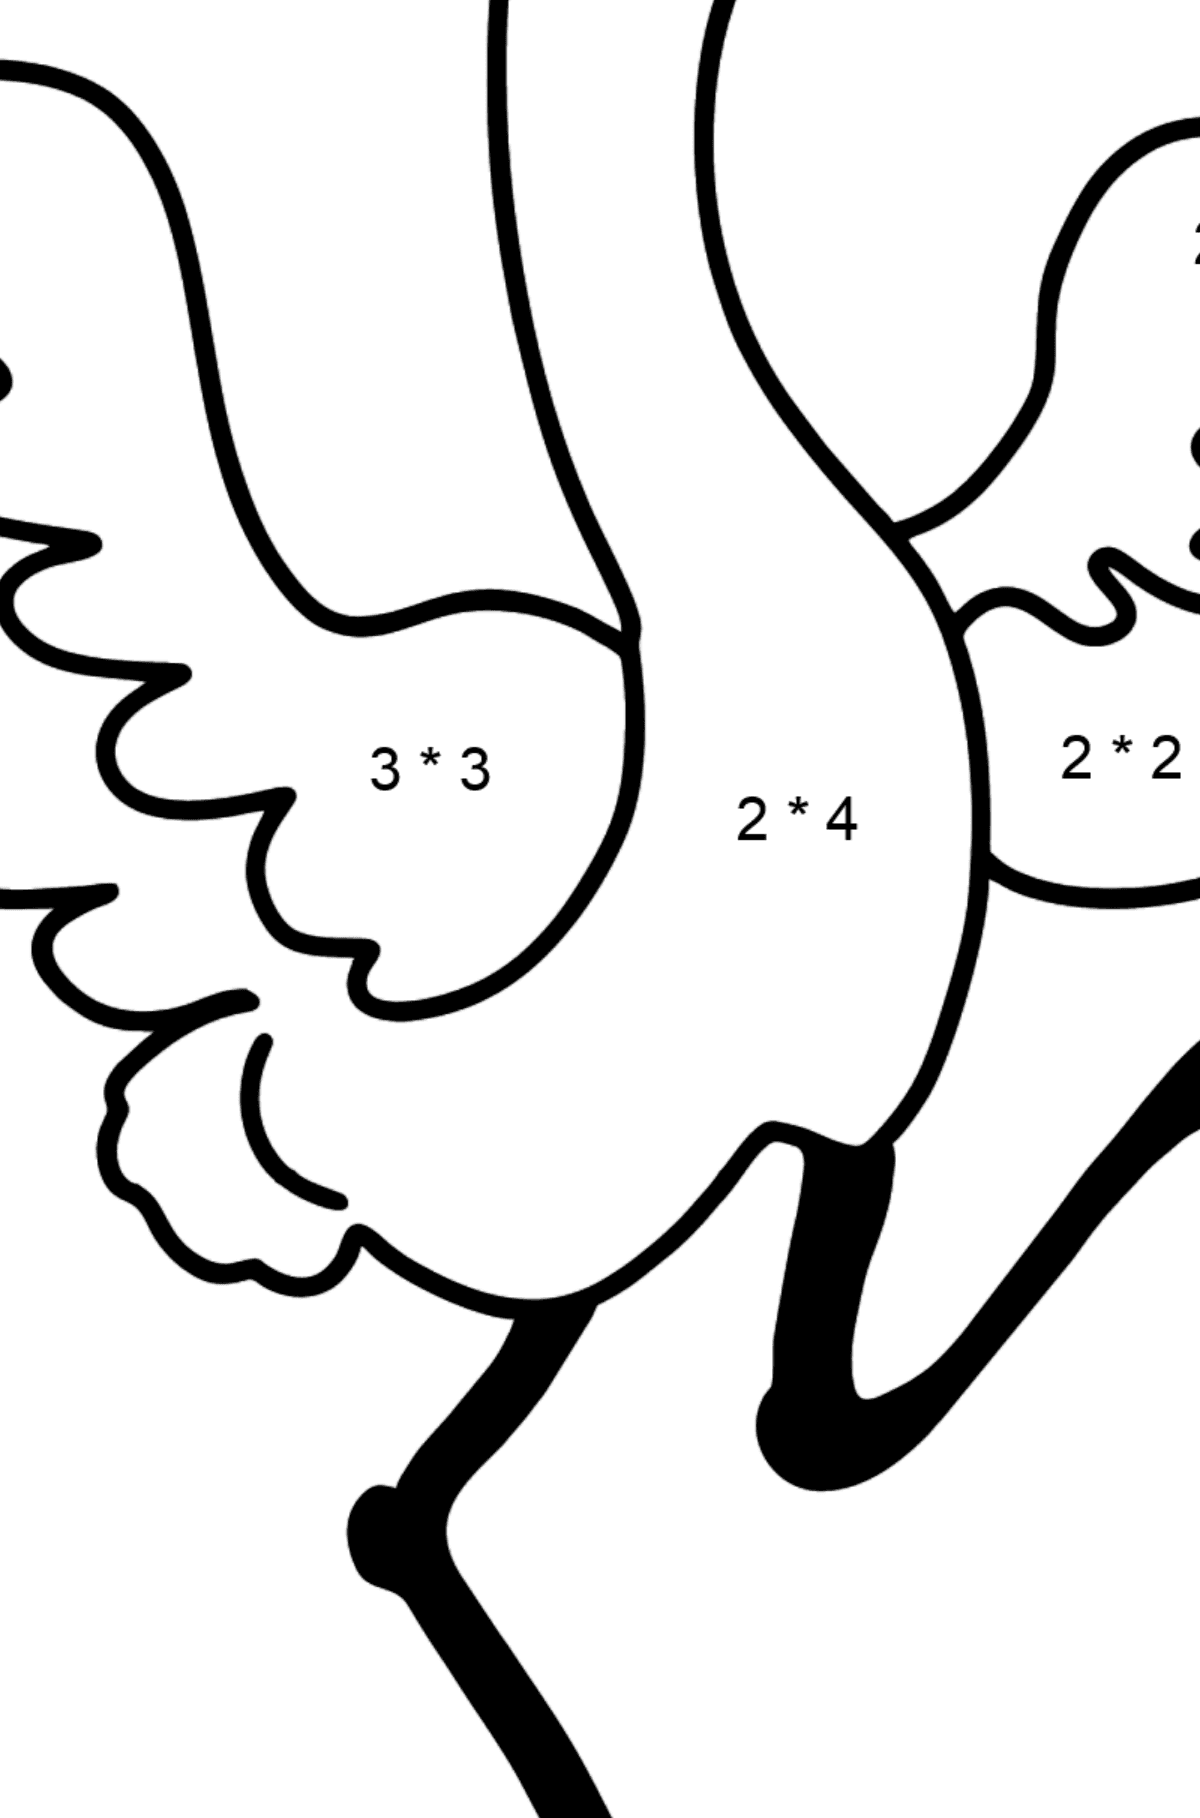 Crane coloring page - Math Coloring - Multiplication for Kids